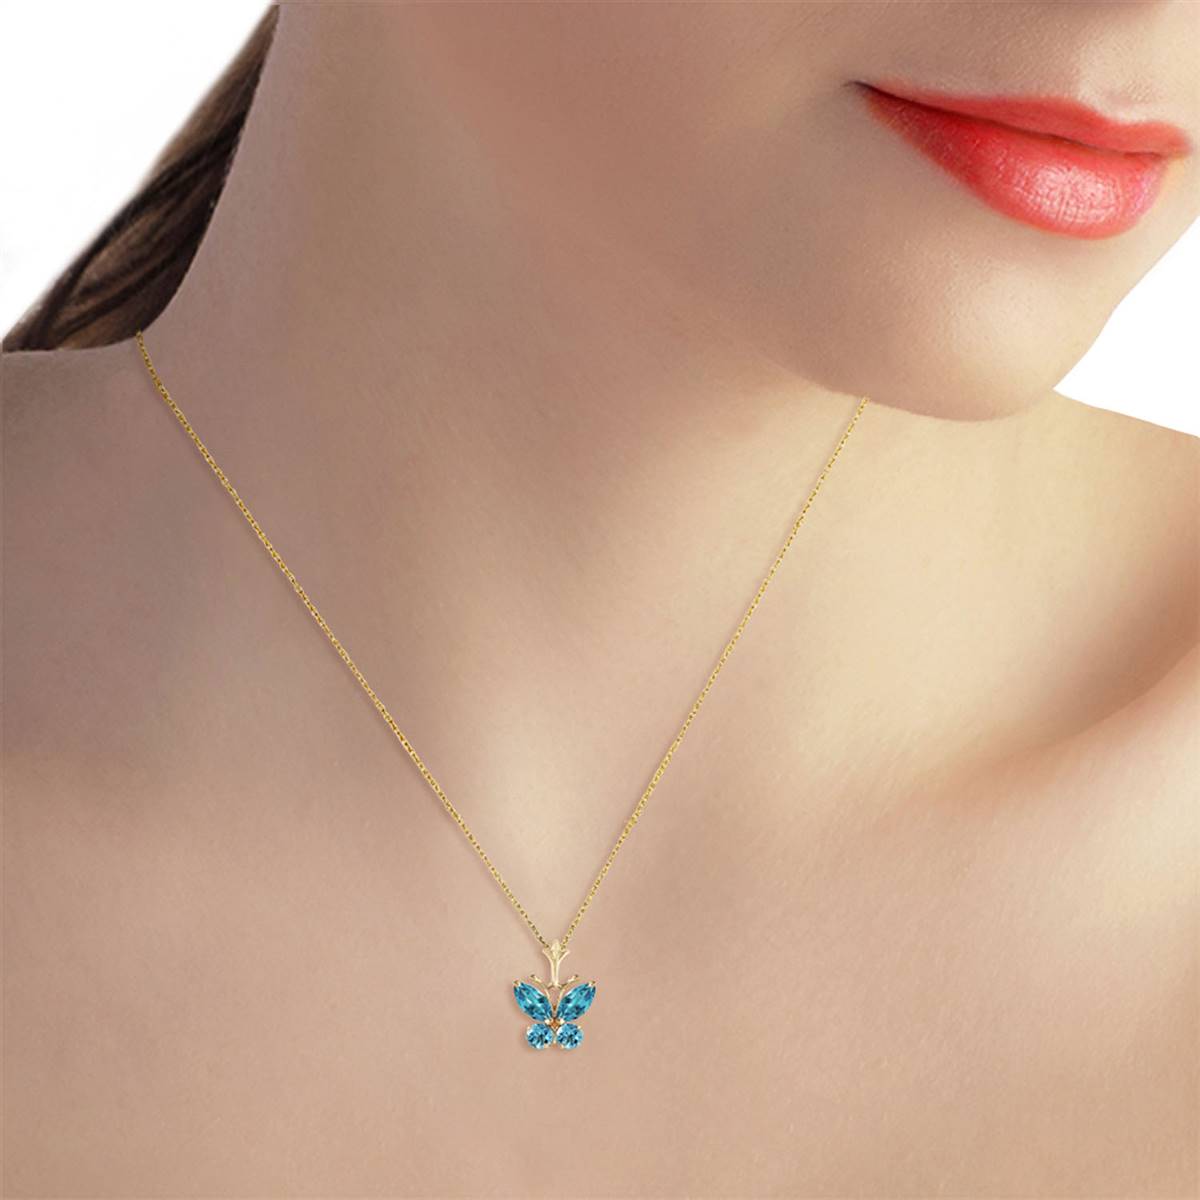 0.6 Carat 14K Solid Yellow Gold Butterfly Necklace Blue Topaz